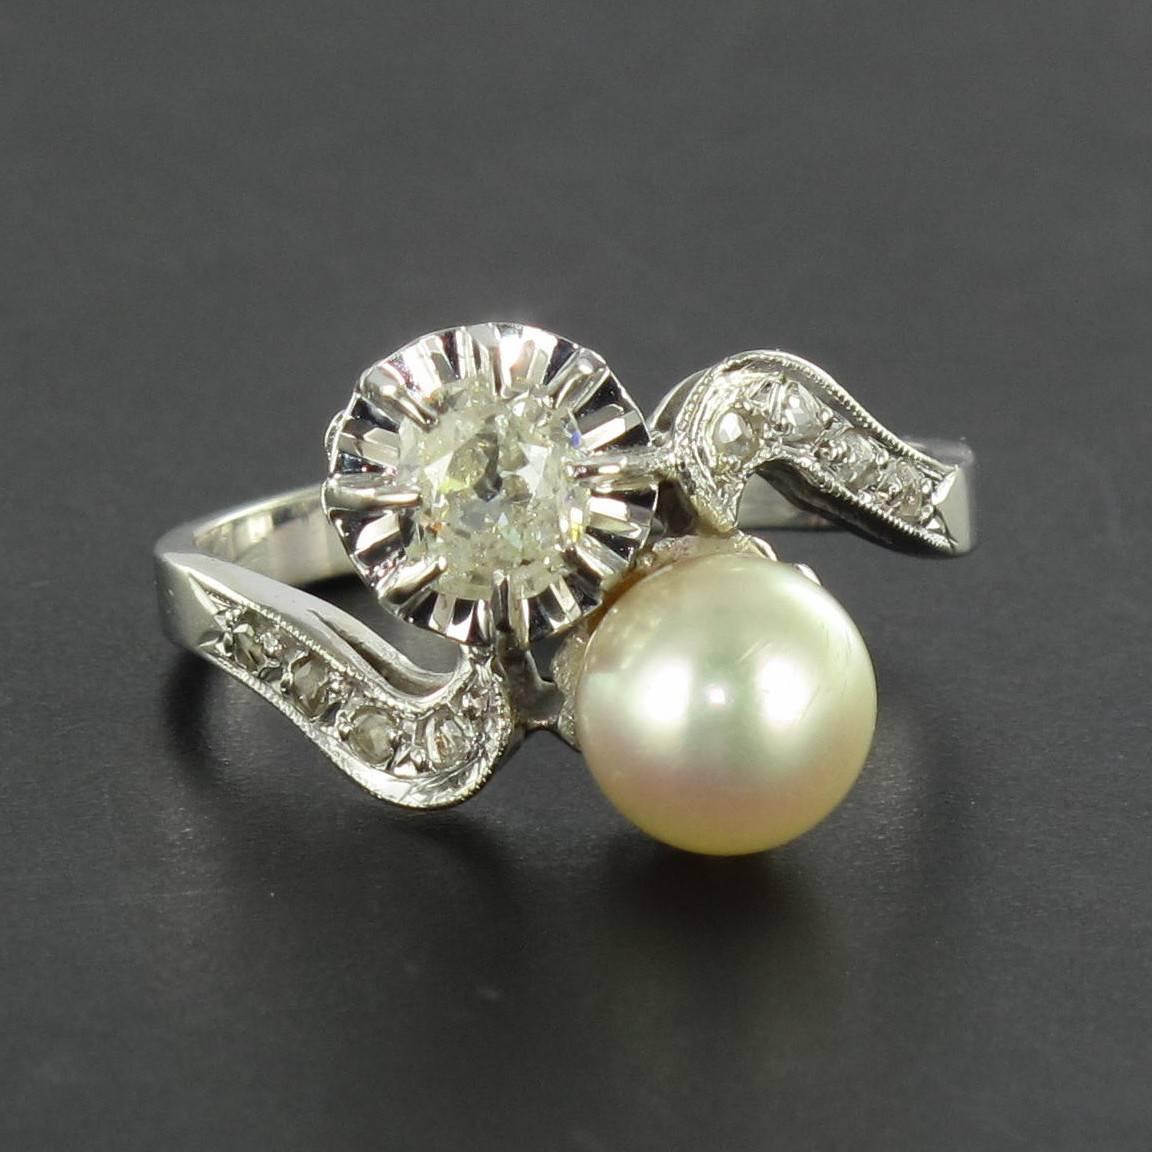 Ring in 18 carat white gold, eagle head hallmark. 

This splendid Lovers ring is set with a pale rose pink oriental cultured pearl and an antique cushion cut diamond. The beginning of the ring band at each side is formed of a beaded arabesque curl